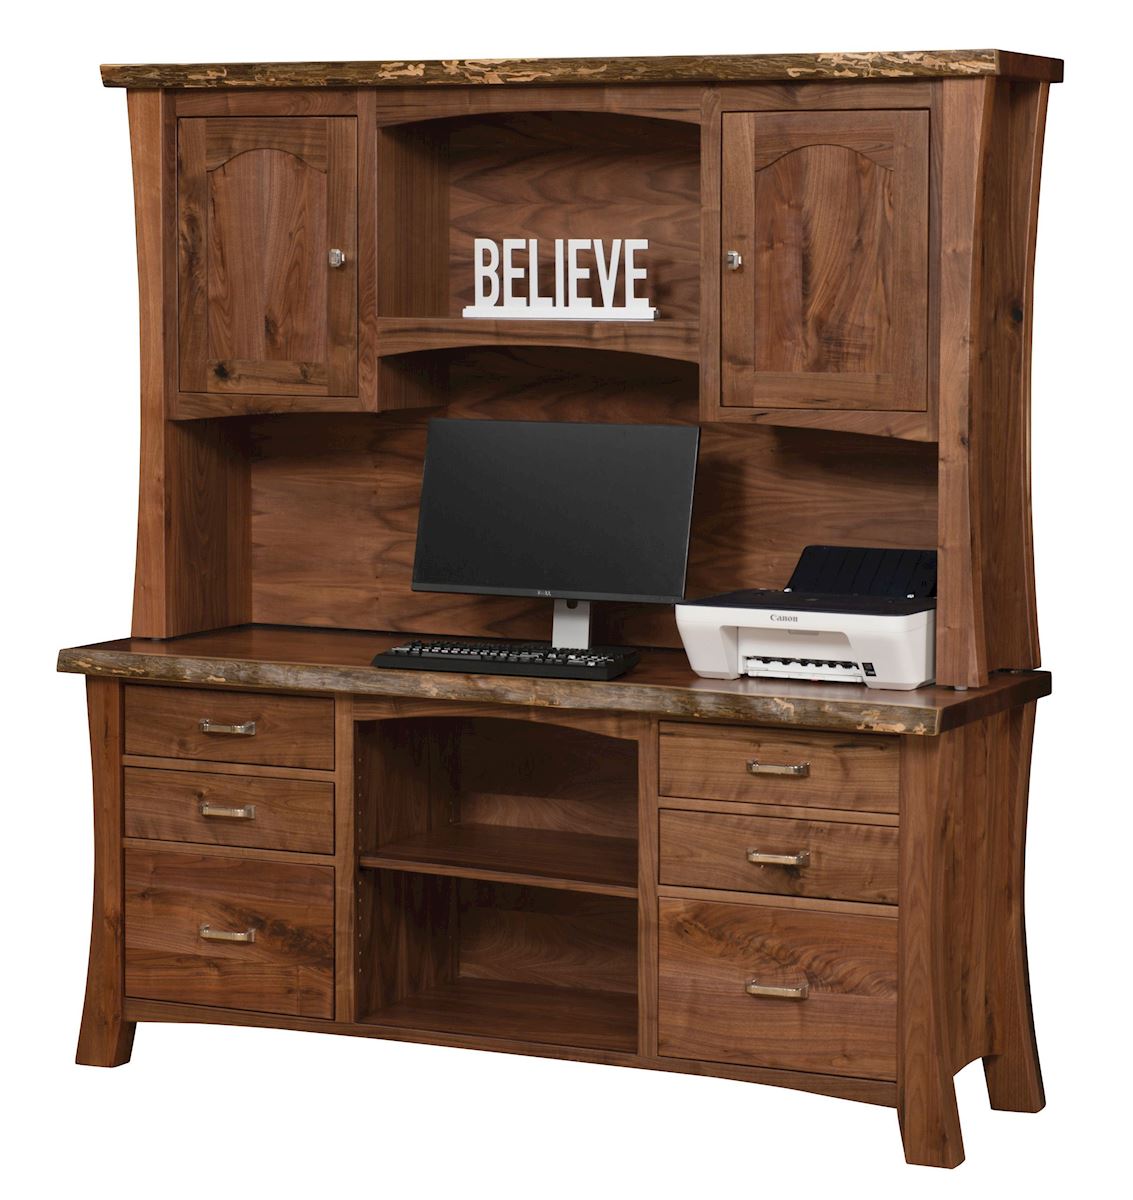 solid-wood-credenza-with-live-edge